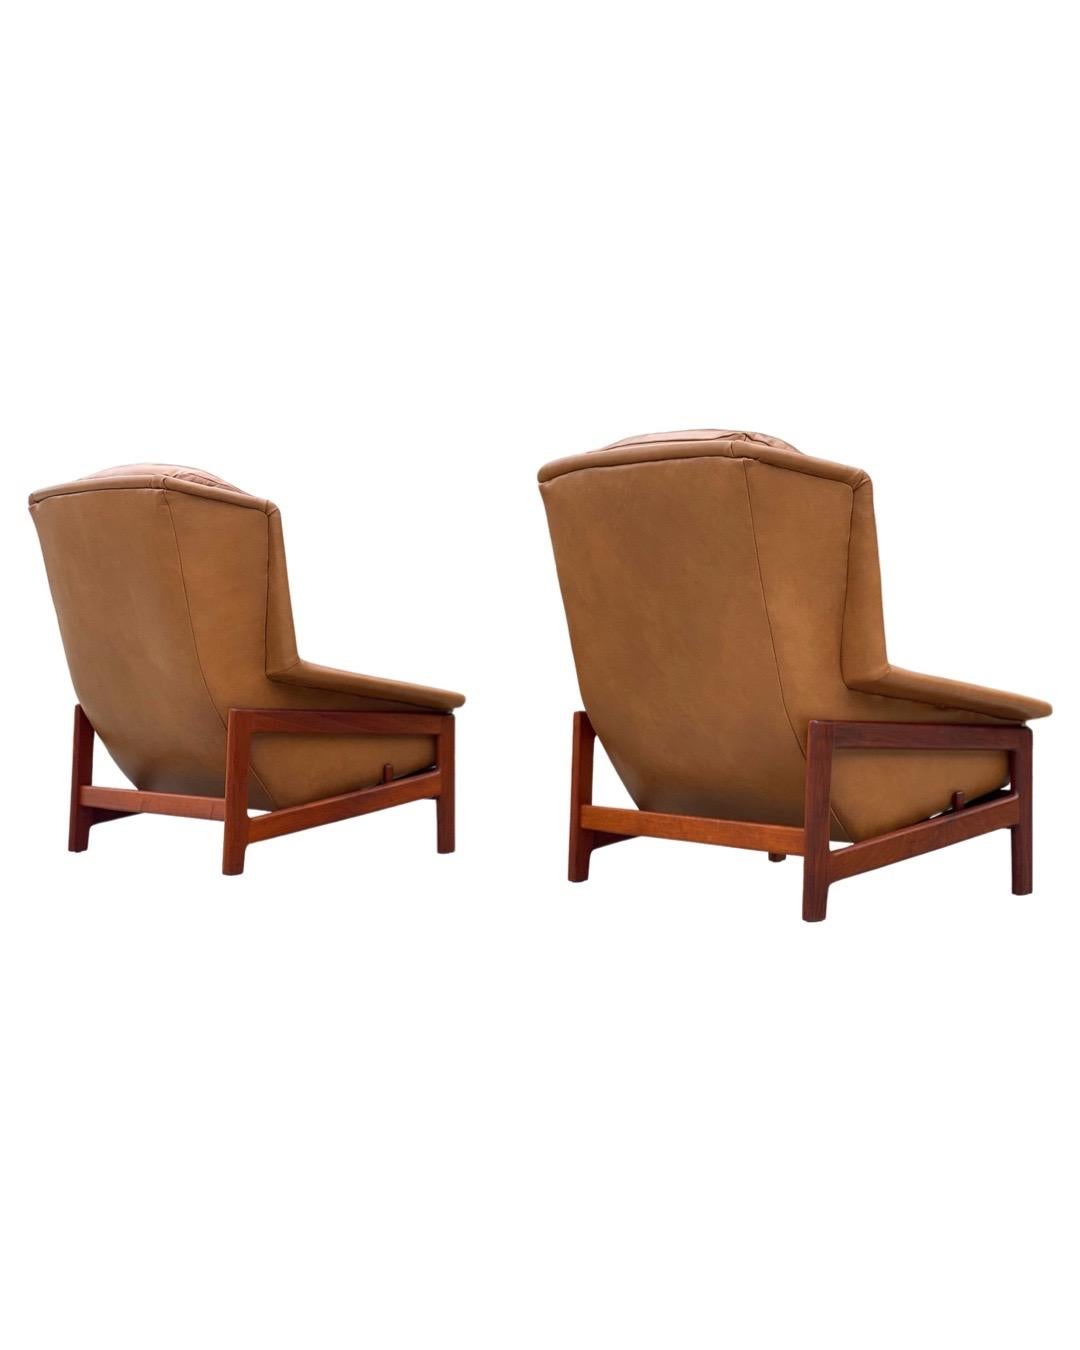 Midcentury Reclining Lounge Chairs in Leather + Walnut by Folke Ohlsson for DUX For Sale 6